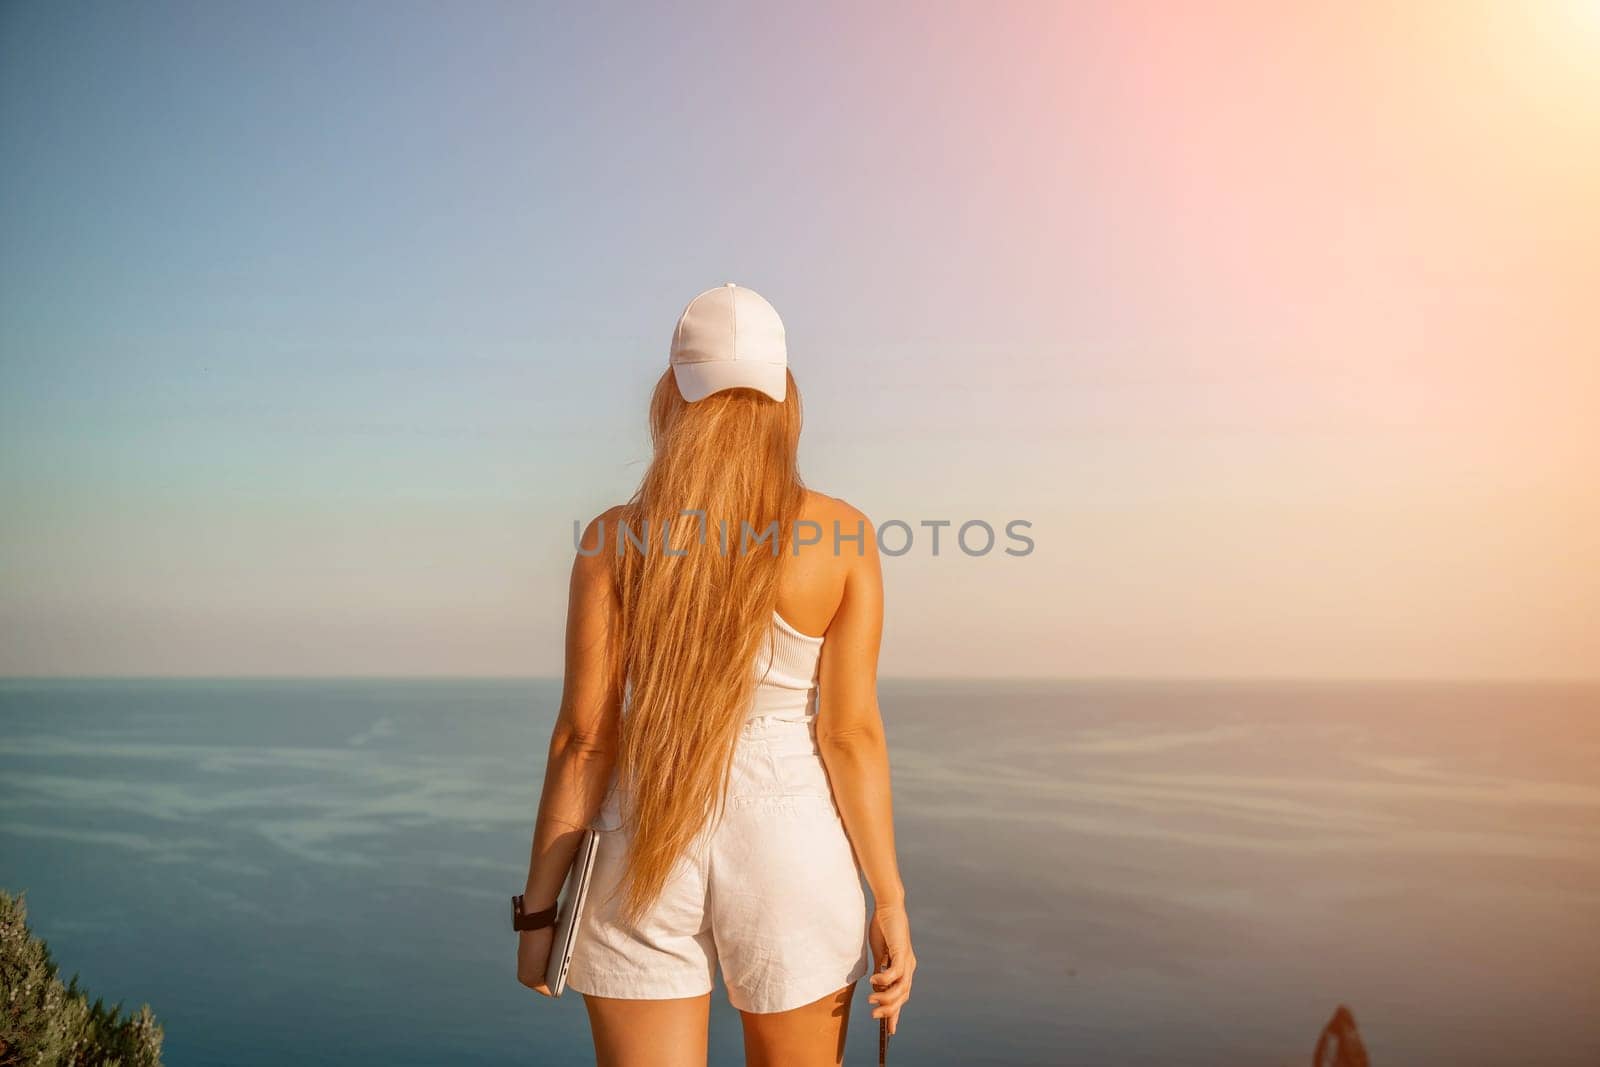 A female tourist stands by the sea wearing a white cap and T-shirt, looking happy and relaxed